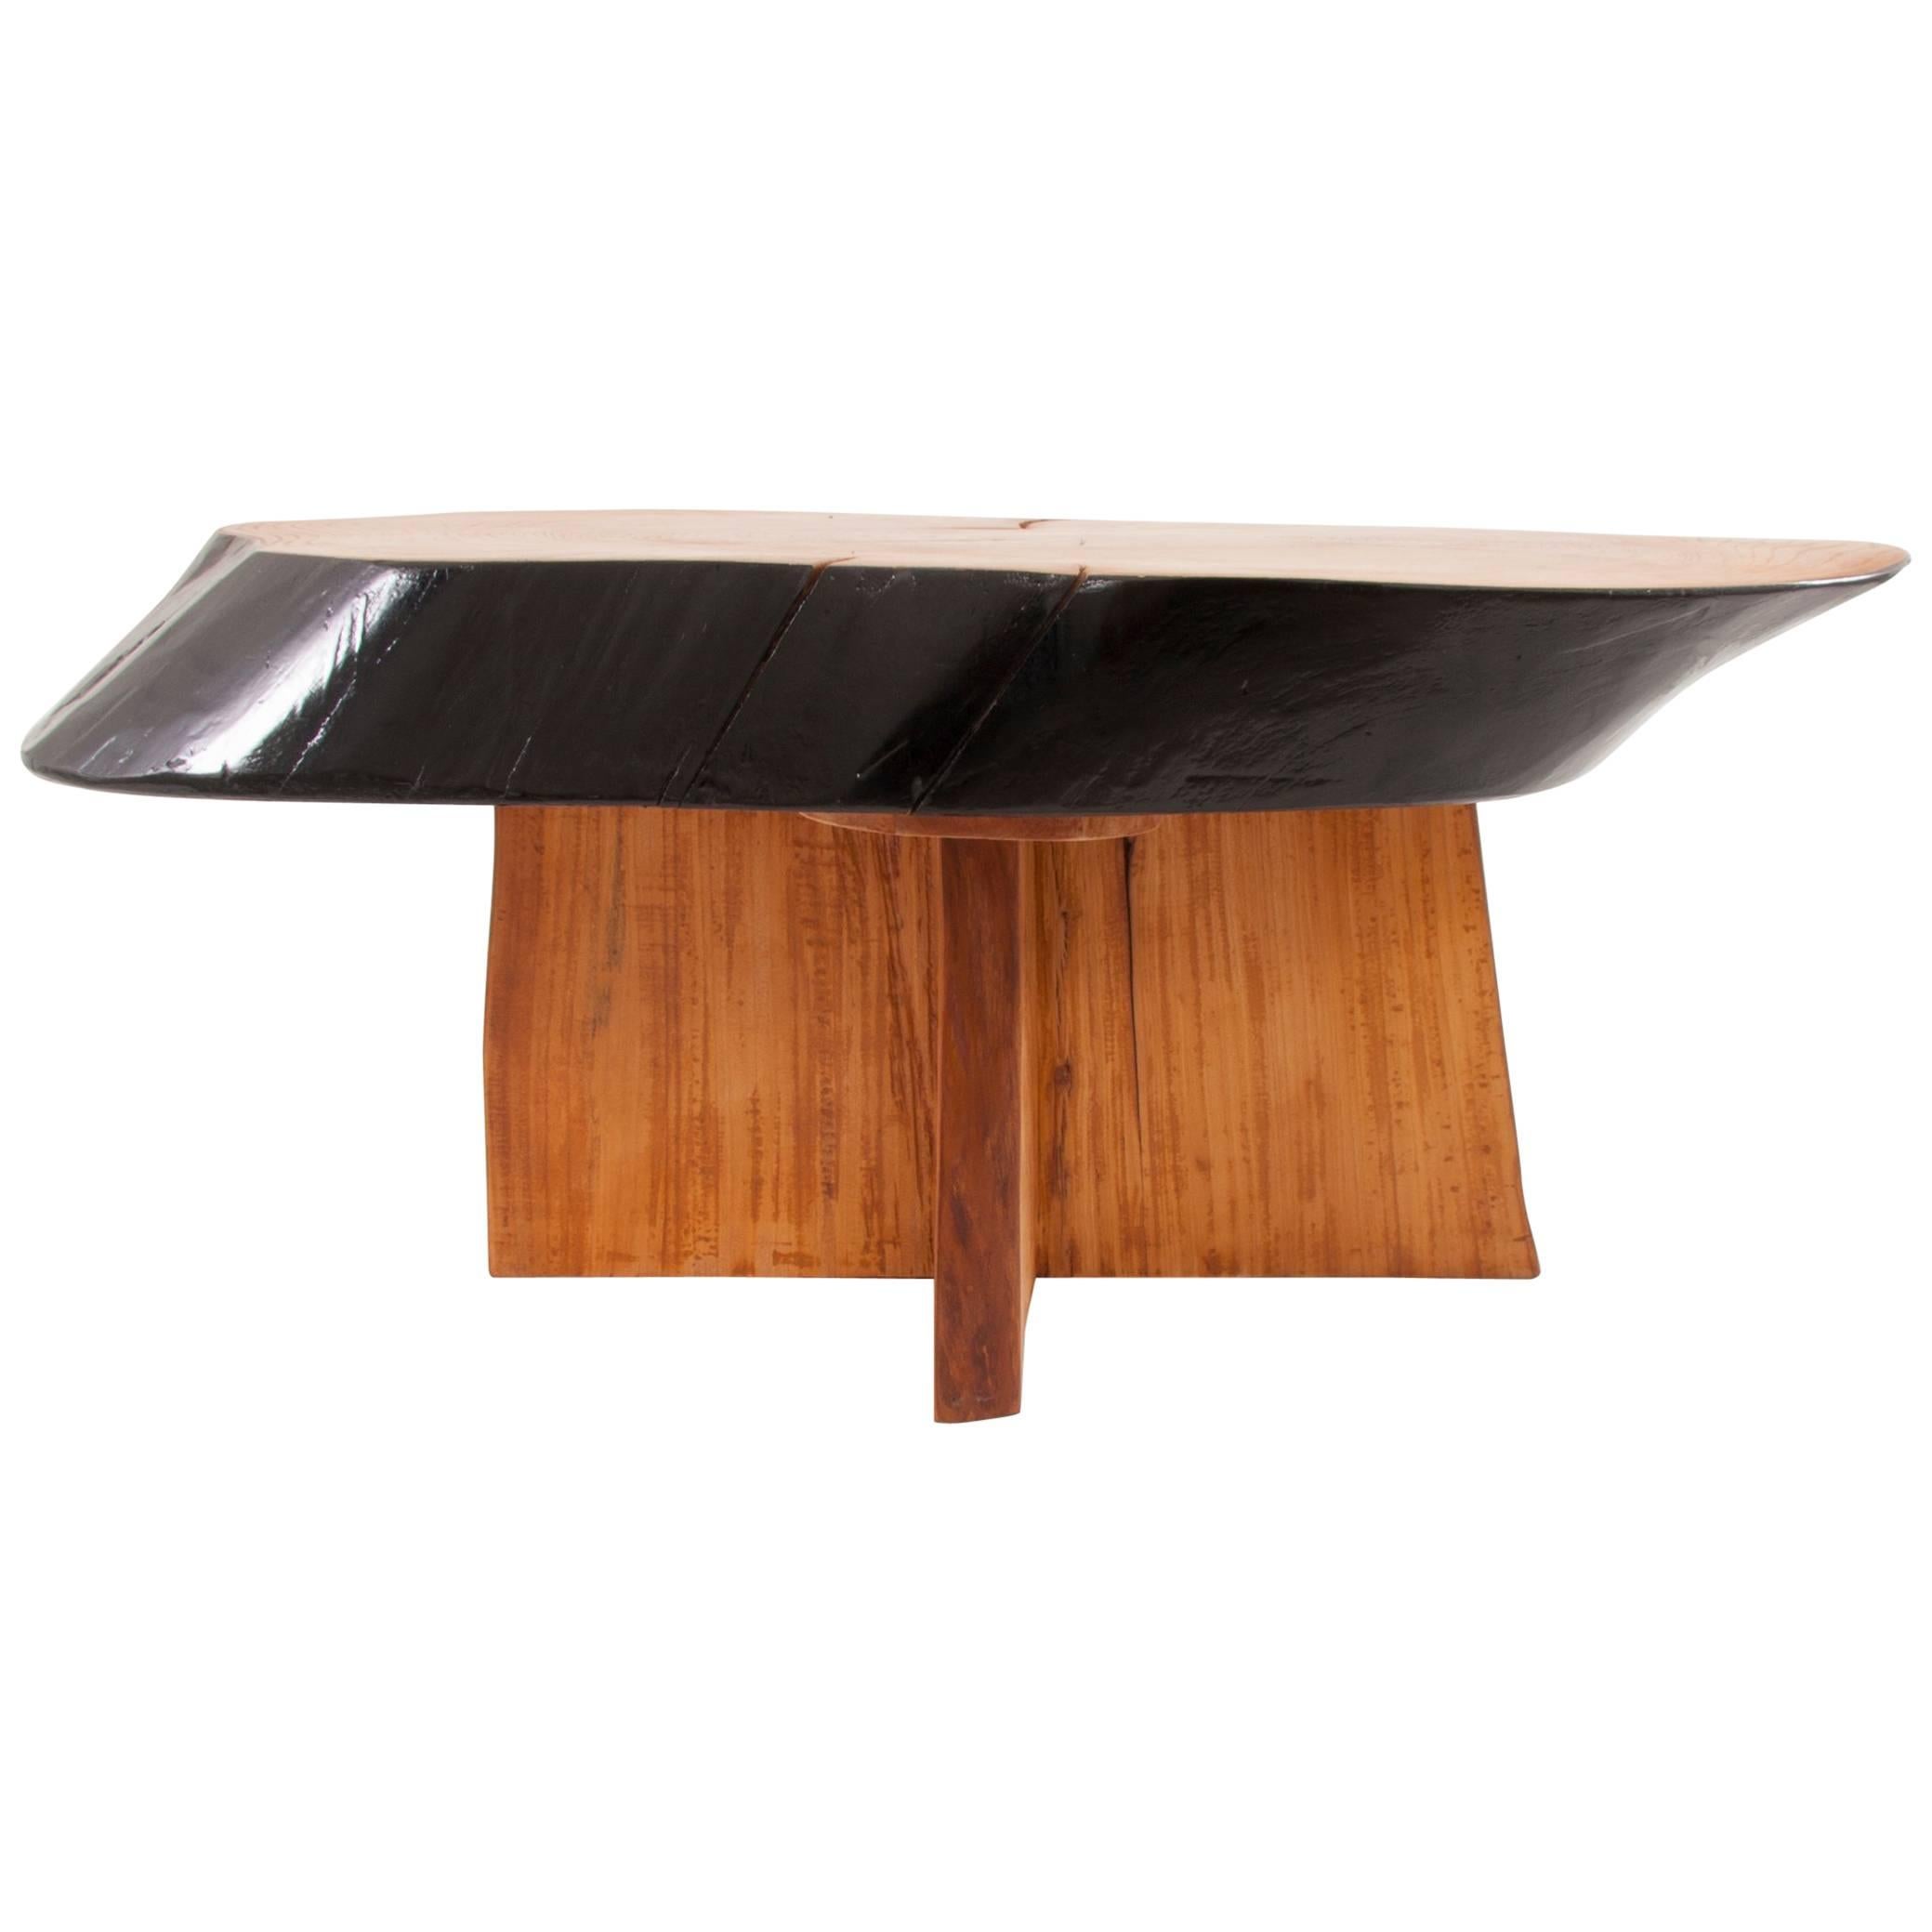 Impressive Maple Tree Trunk Coffee Table in the Style of George Nakashima, 1950s